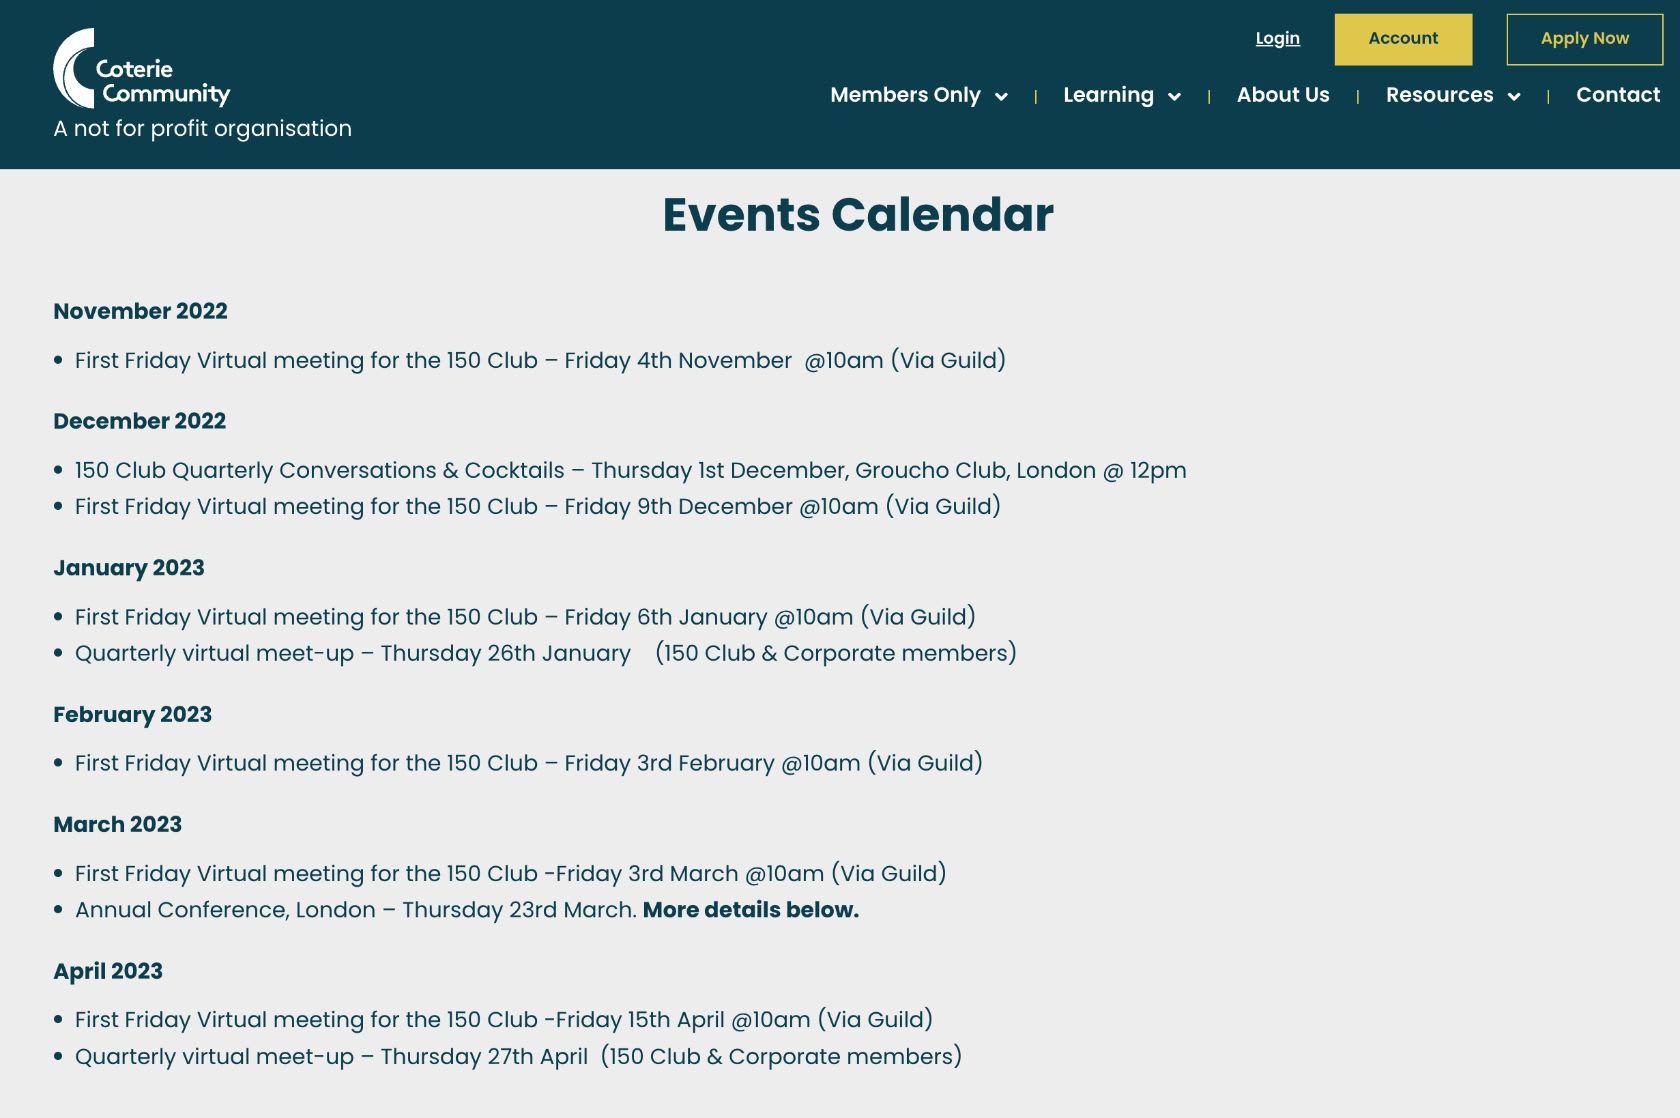 Coterie Community's events calendar mixes virtual events on Guild with in-person meetups